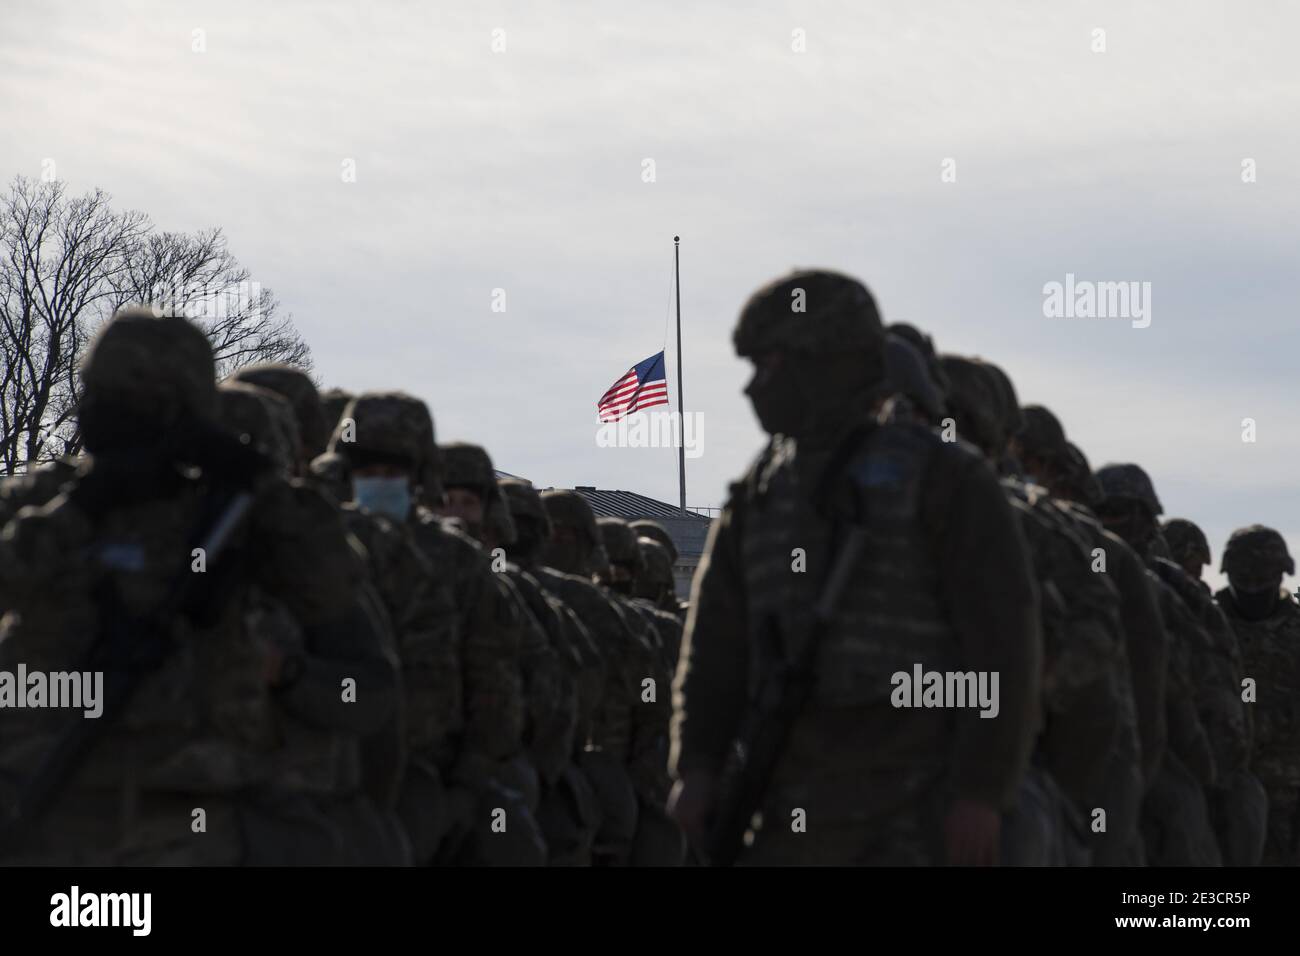 Washington, United States. 18th Jan, 2021. Members of the US National Guard arrive as the US Capitol goes into lockdown from a security breach during the dress rehearsal for the 59th inaugural ceremony for President-elect Joe Biden and Vice President-elect Kamala Harris at the U.S. Capitol on January 18, 2021 in Washington, DC. Biden will be sworn-in as the 46th president on January 20th. Pool Photo by Rod Lamkey/UPI Credit: UPI/Alamy Live News Stock Photo